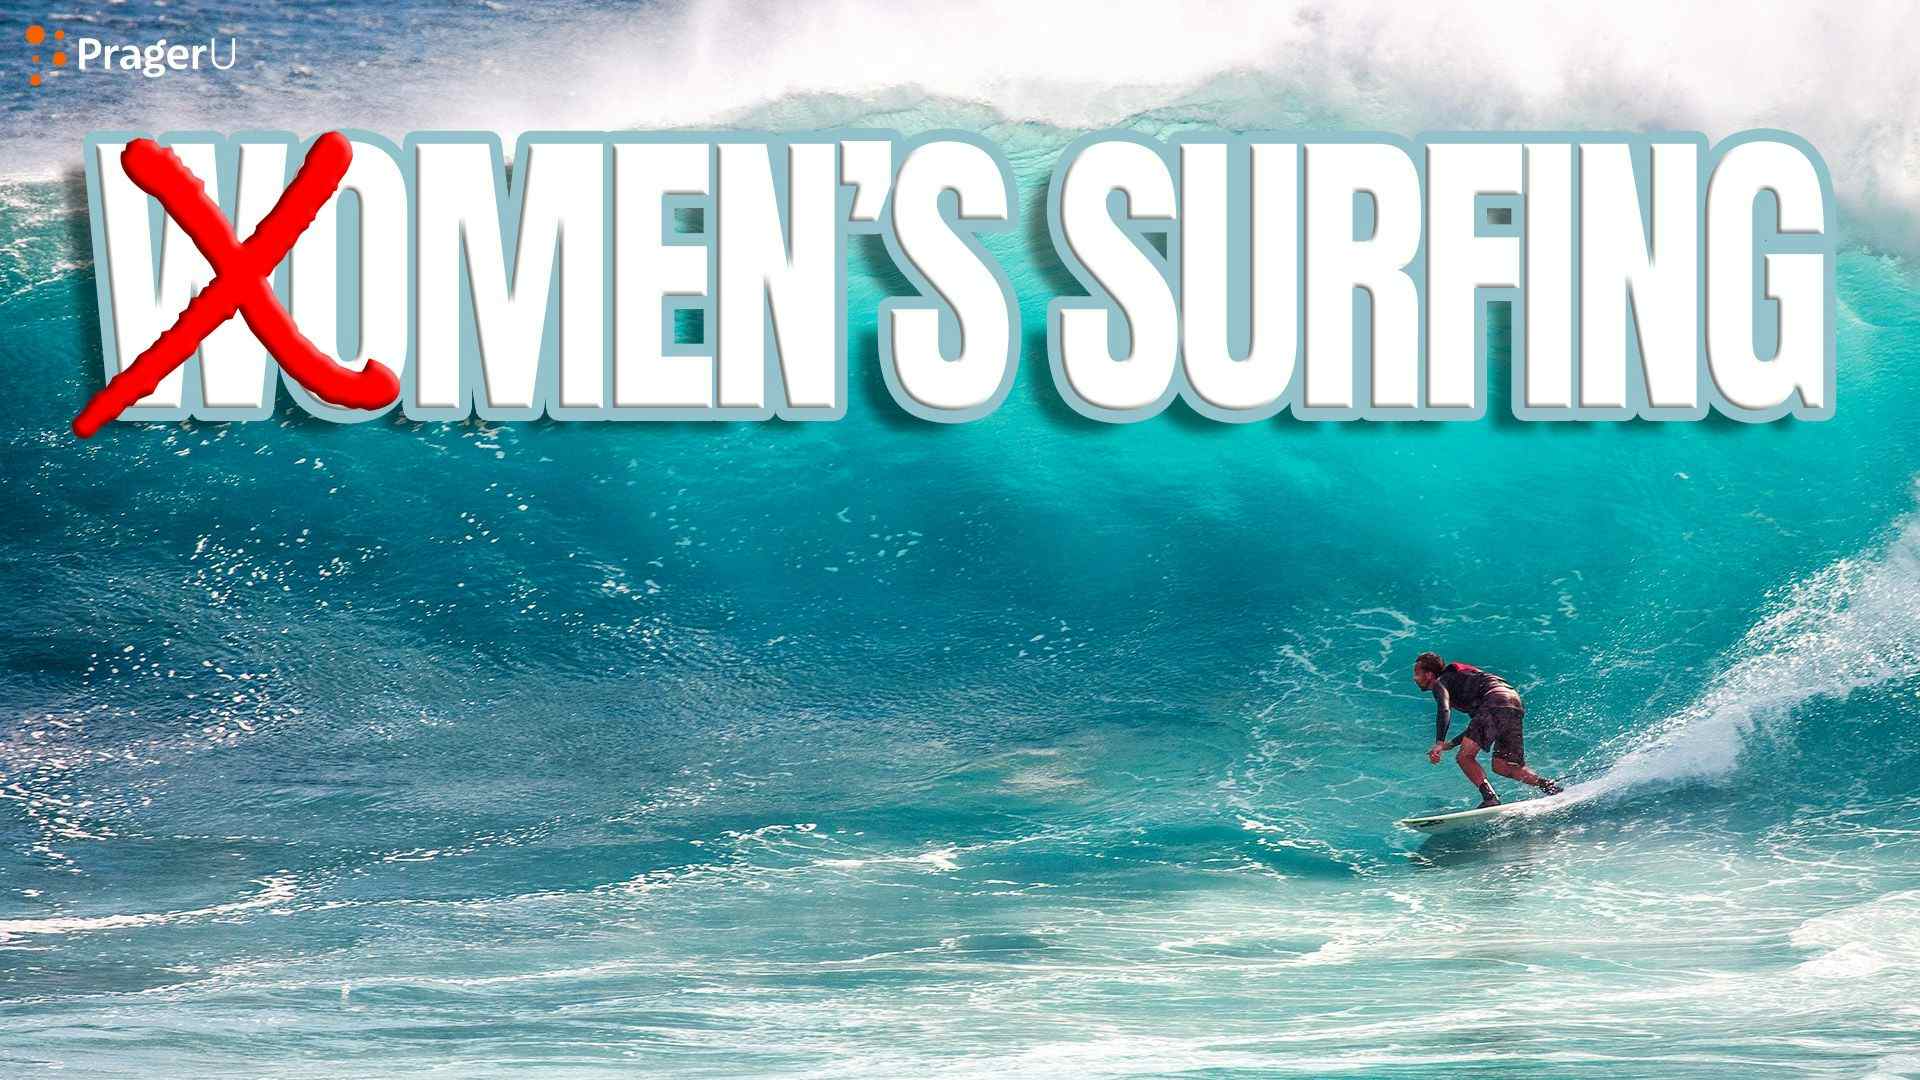 Biological Men to Compete in Women's Surfing?